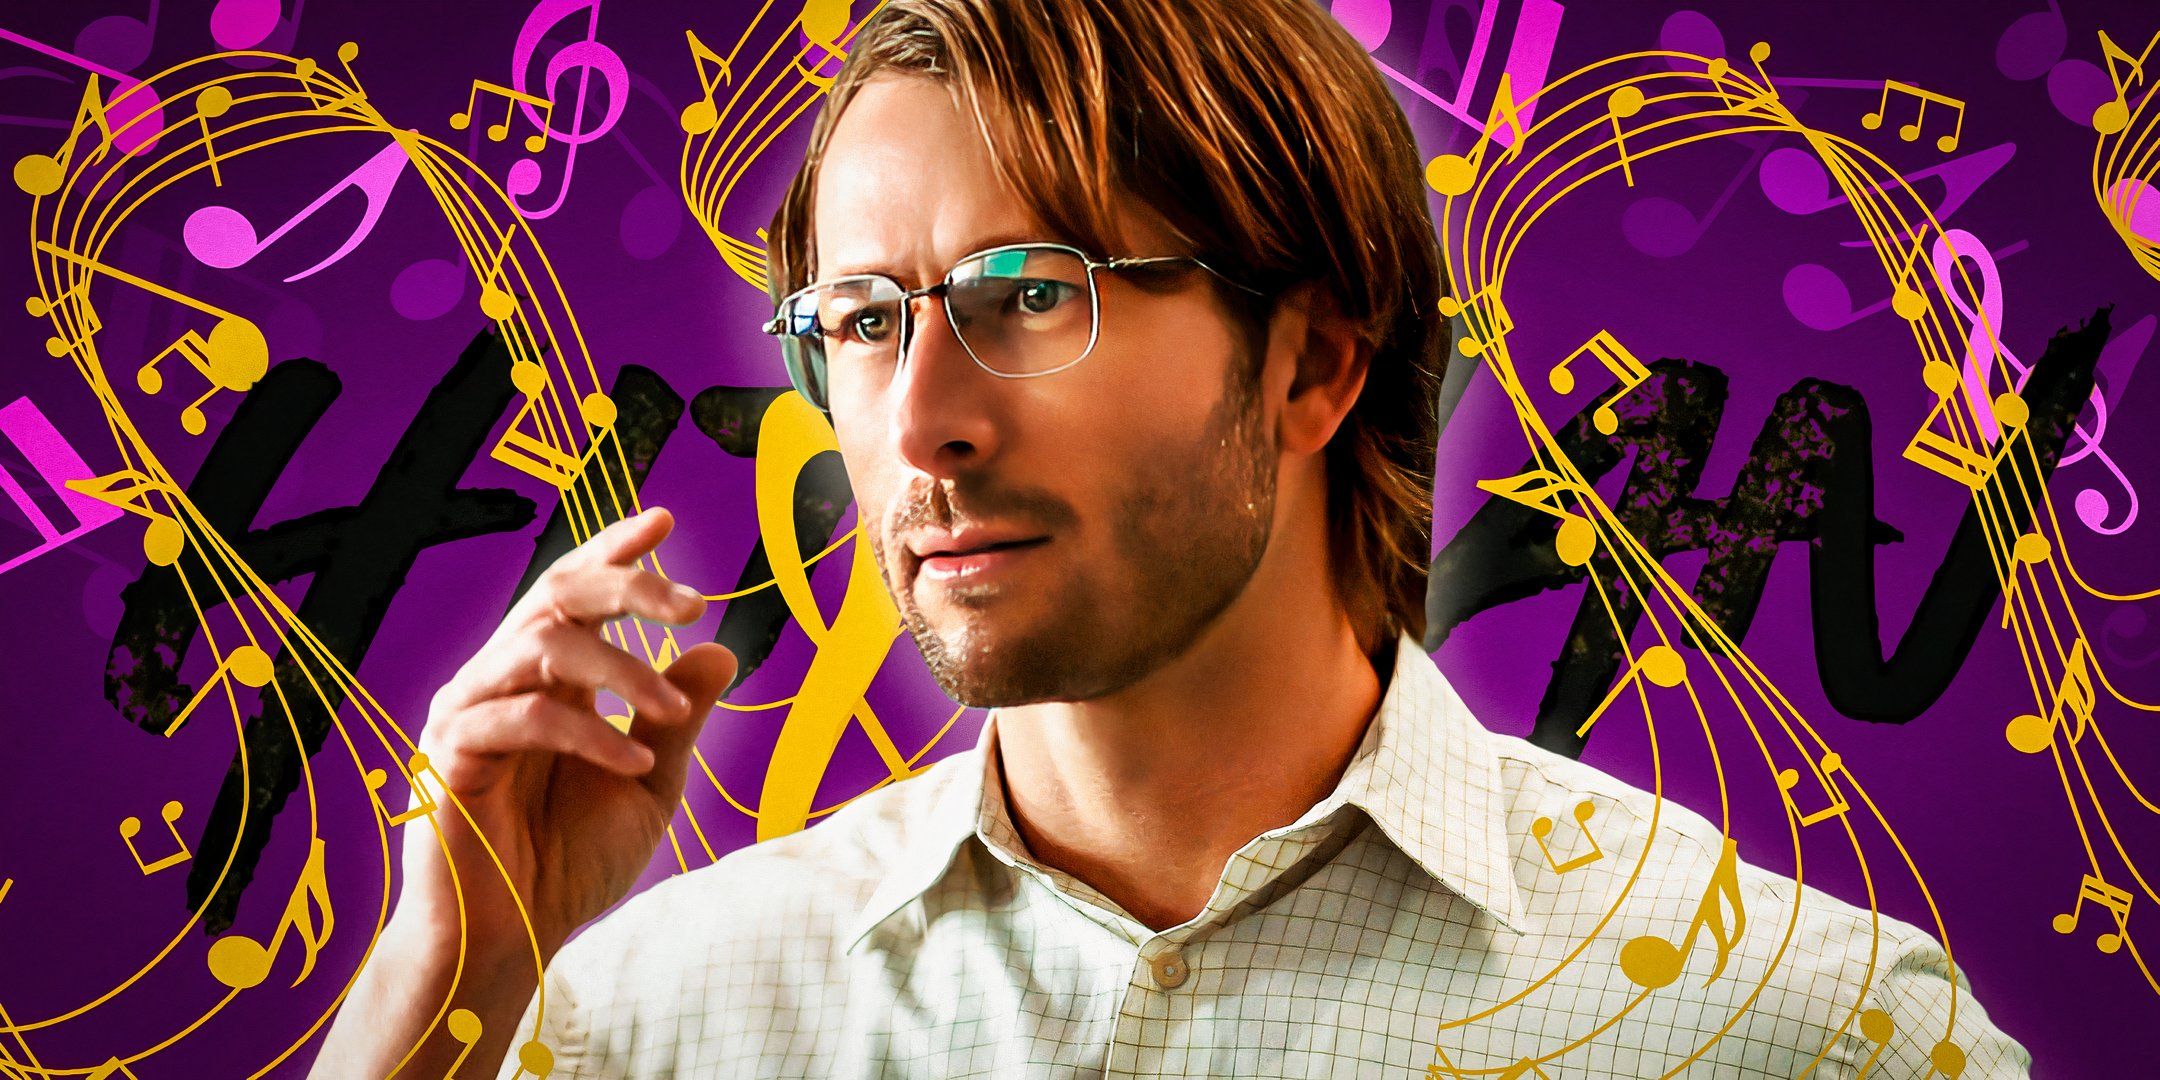 Glen Powell as Gary Johnson in Hit Man (2023) above a background of musical notes and sheet music